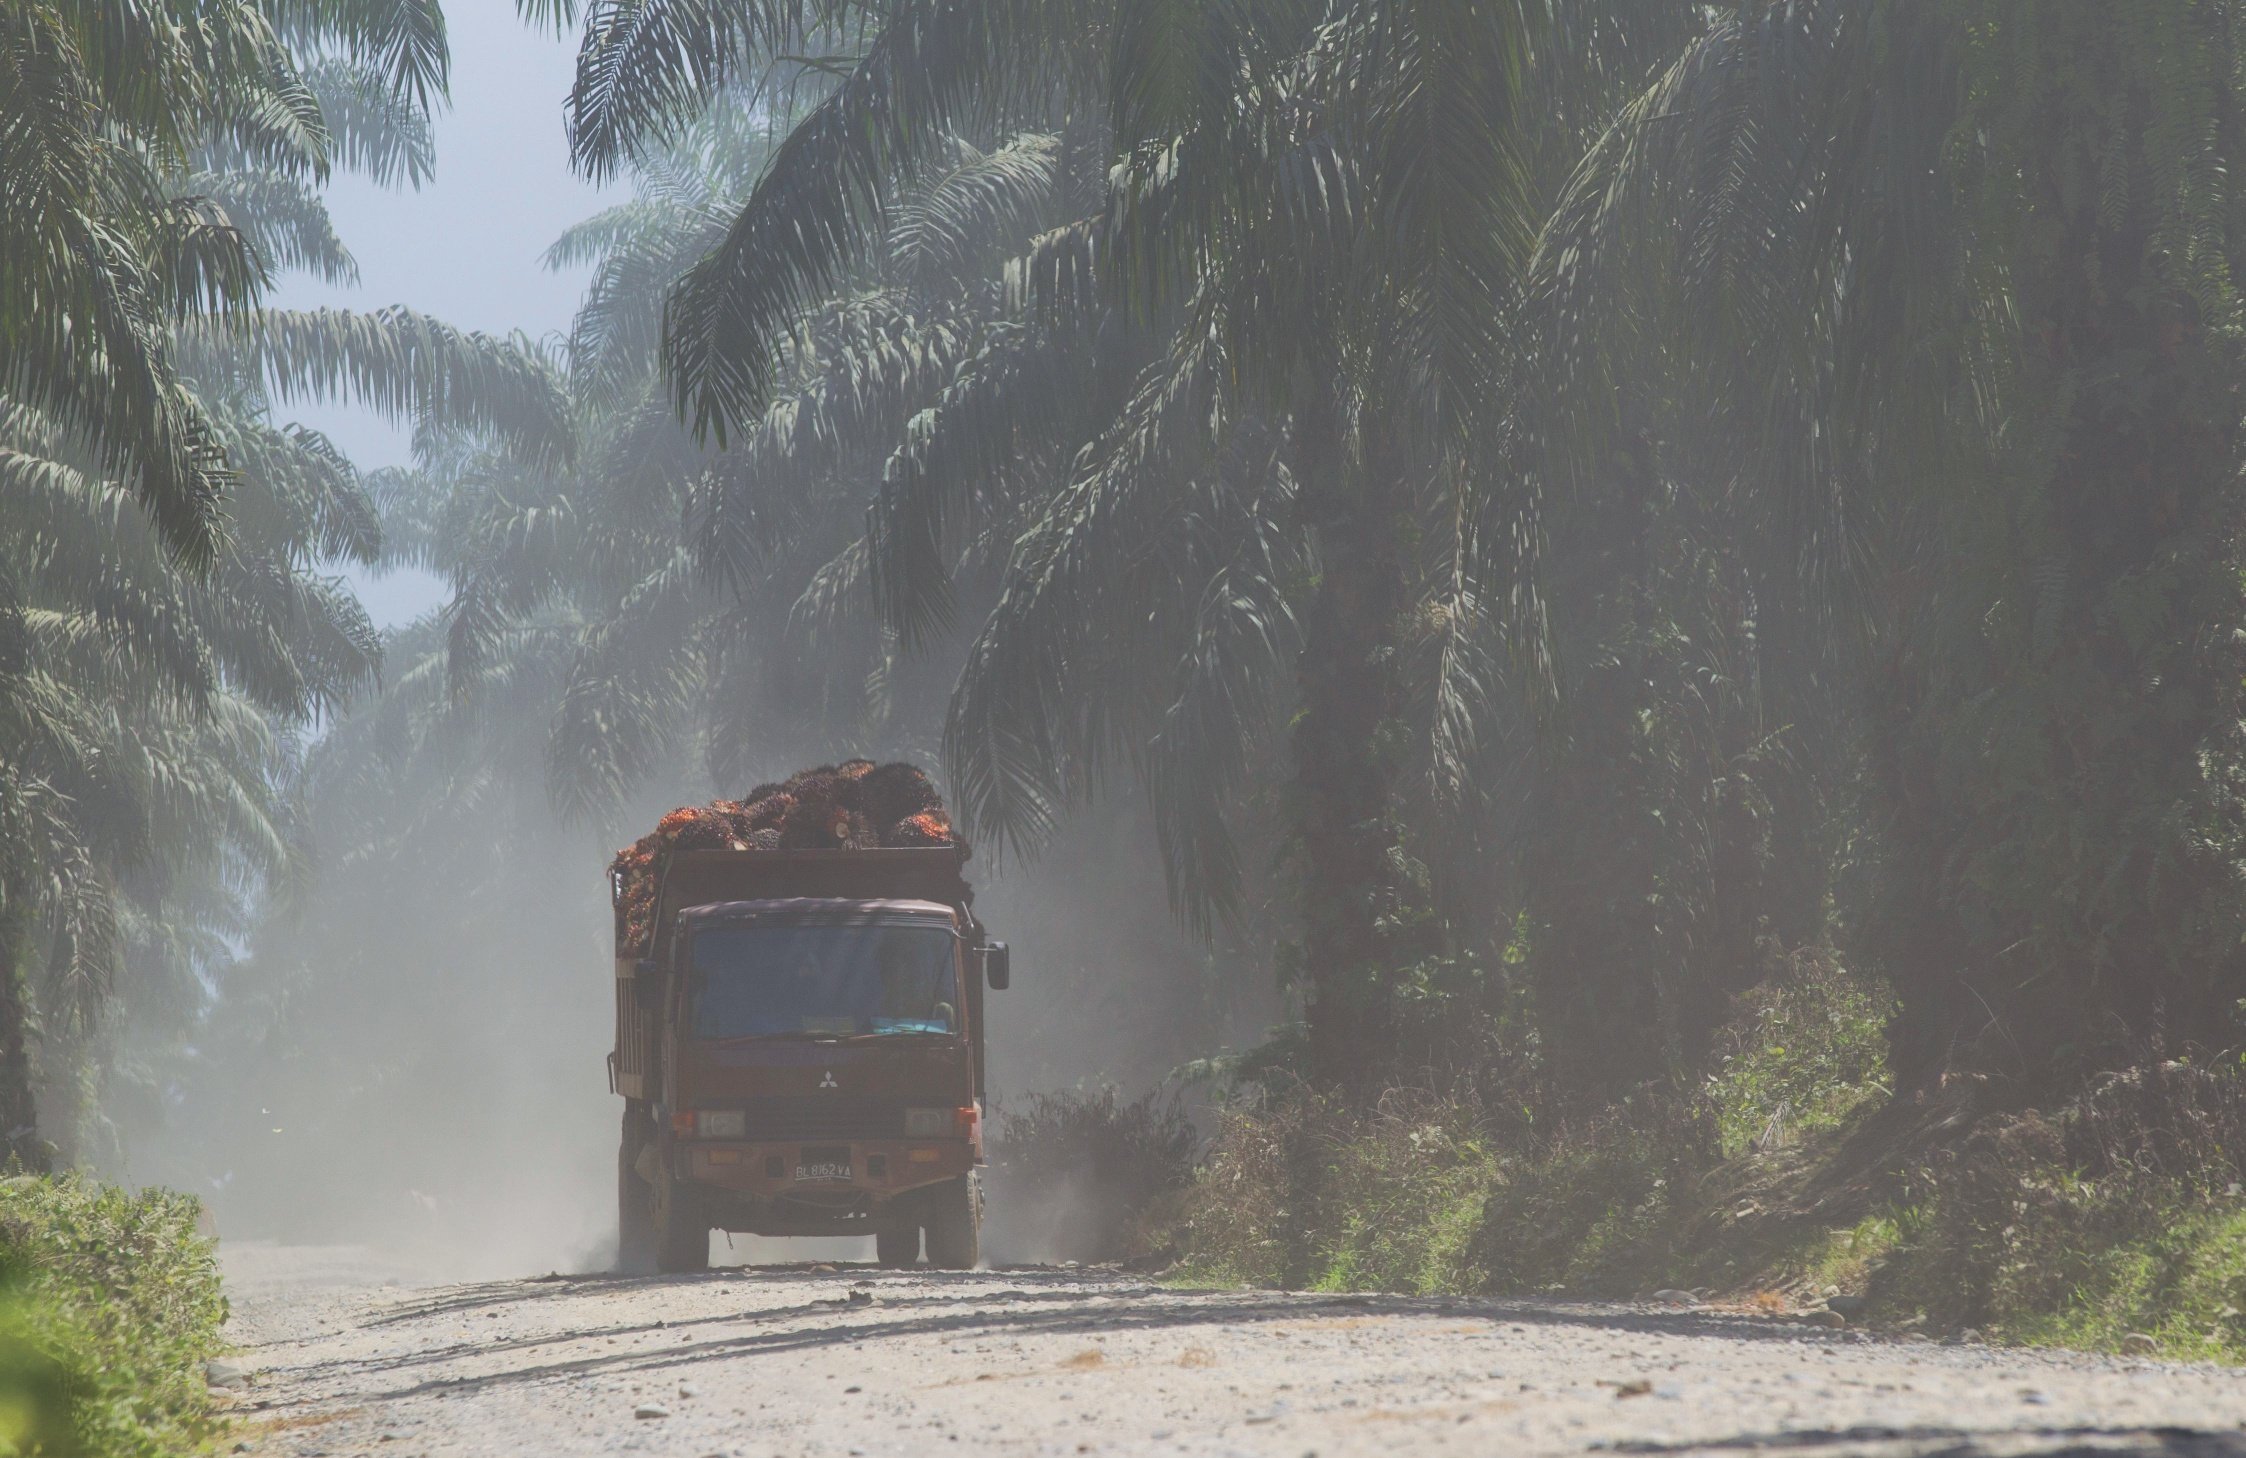 The corporate crime occurring in Leuser is an open secret. Even the smoke from the fires doesn't hide a truck with its illegal cargo.